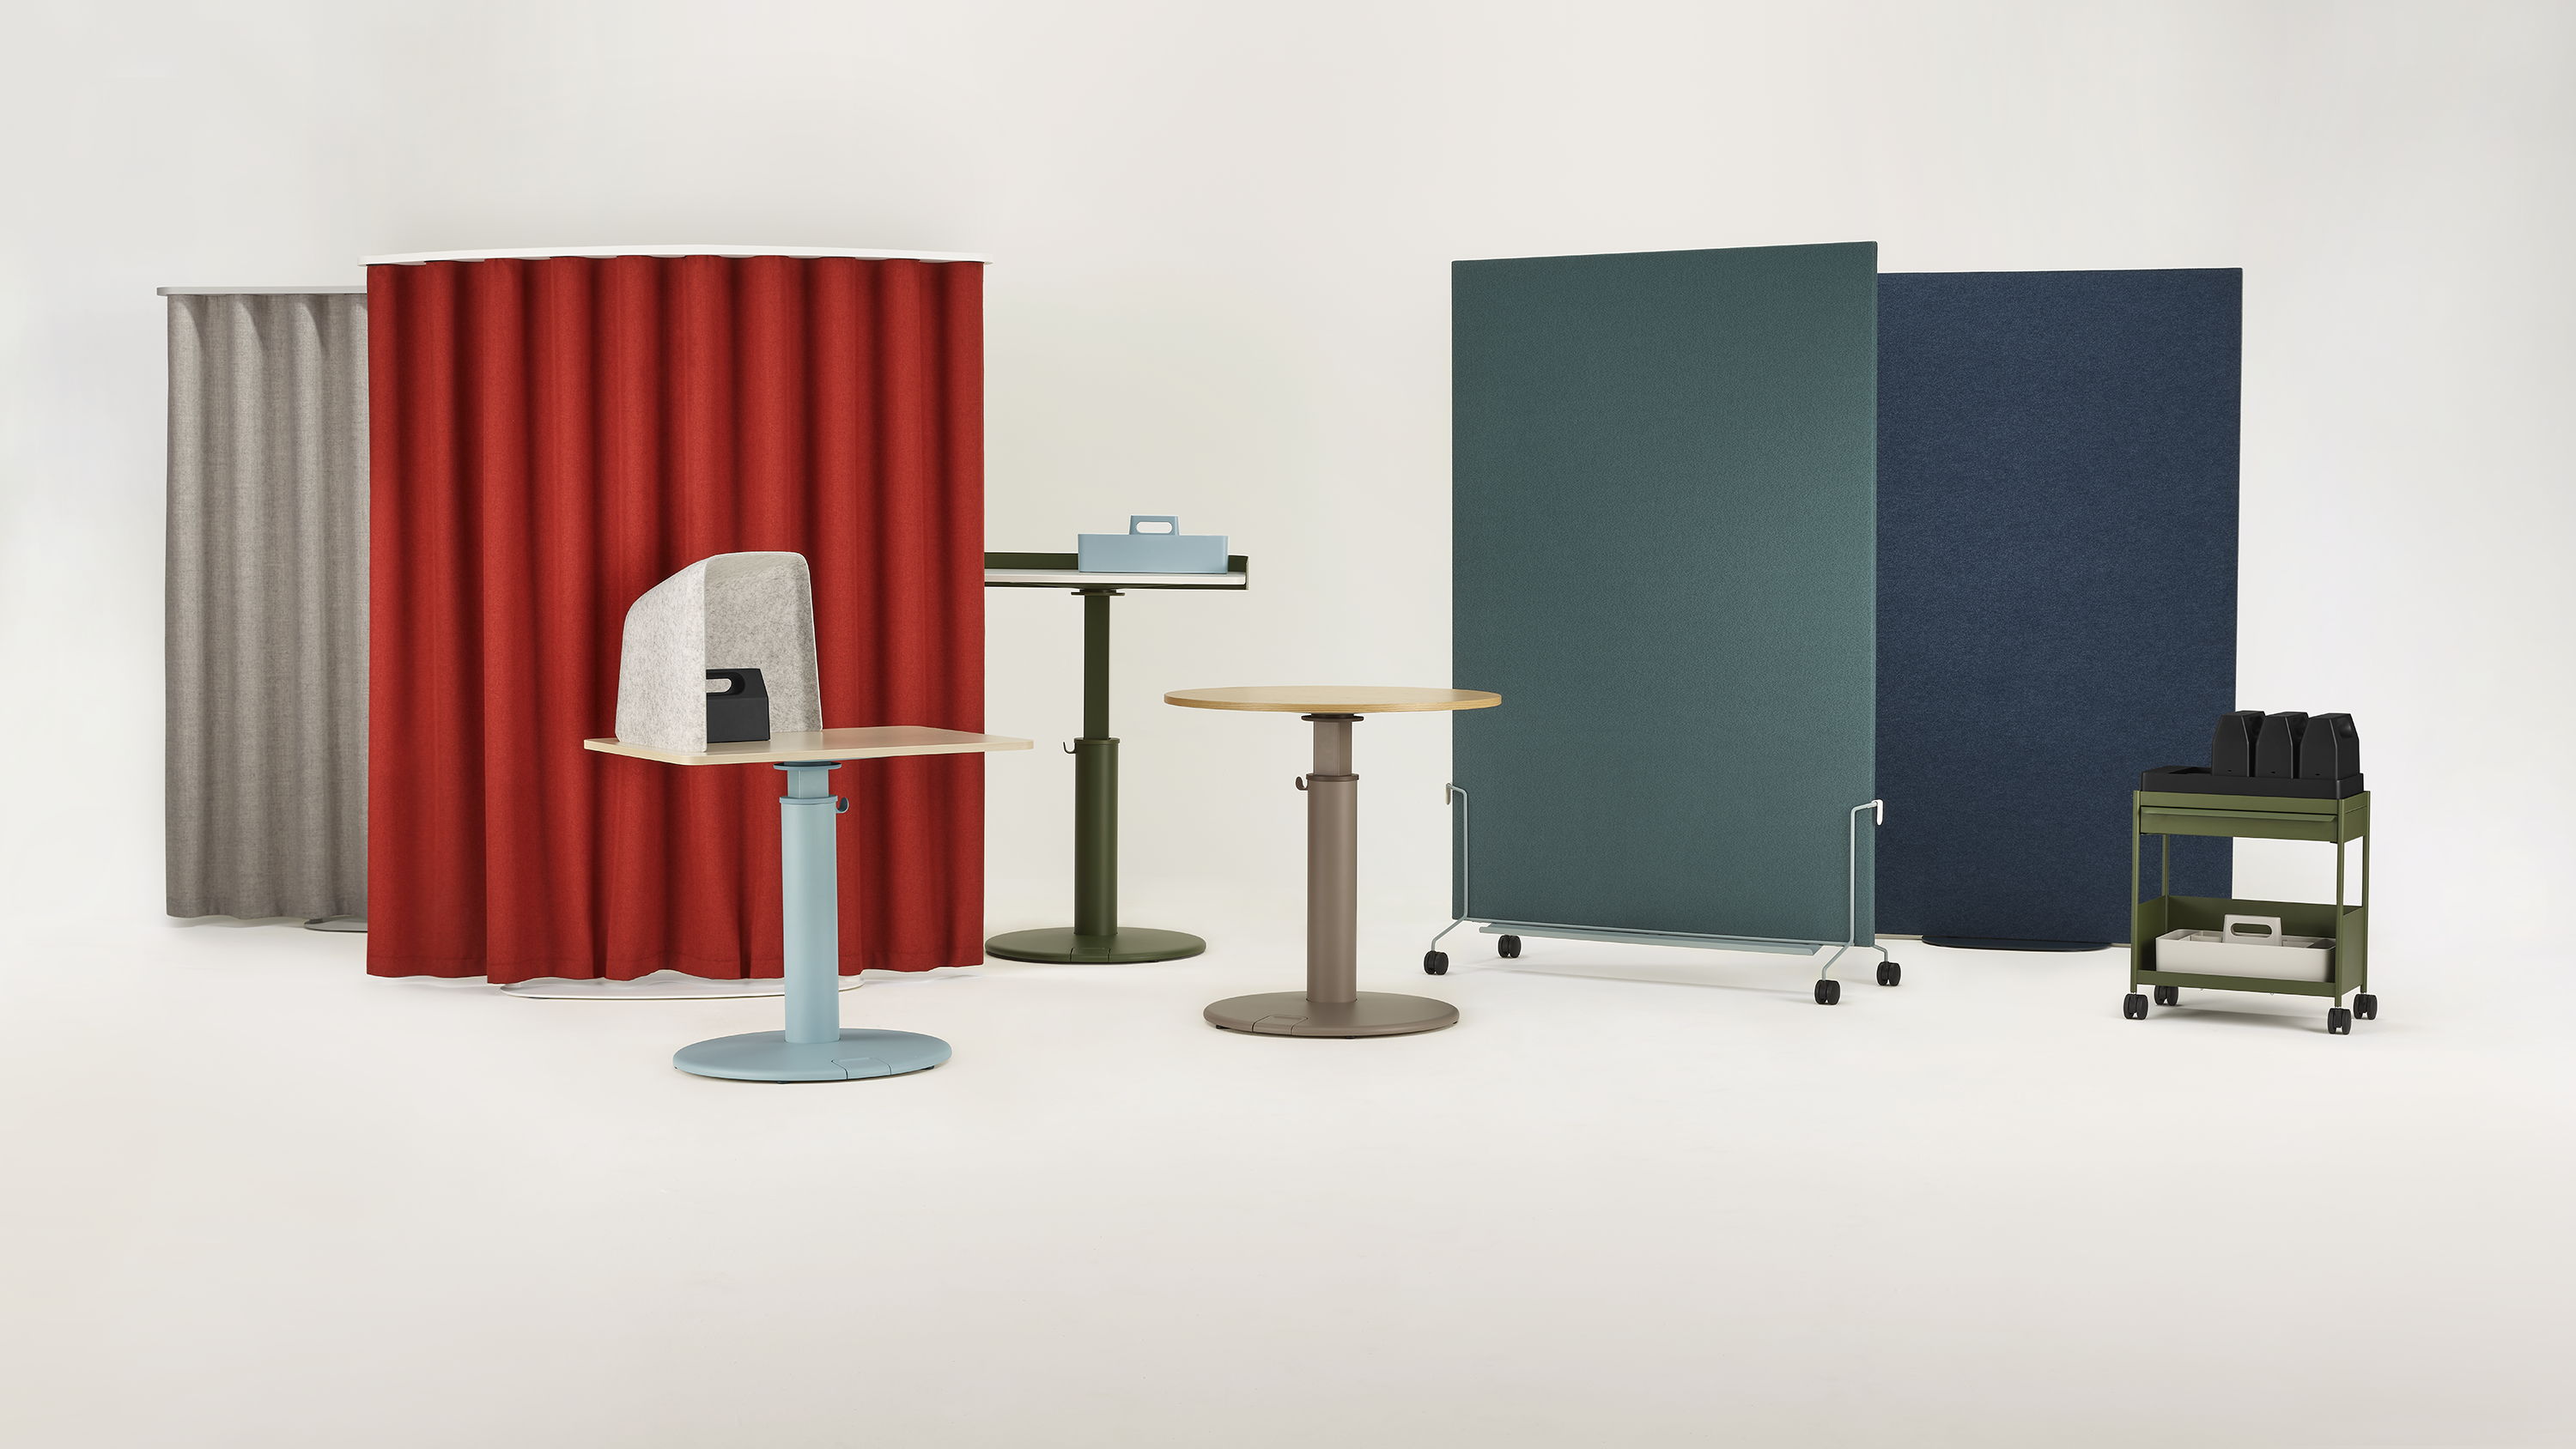 Herman Miller expands OE1 Workspace Collection designed by Sam Hecht and Kim Colin of Industrial Facility 